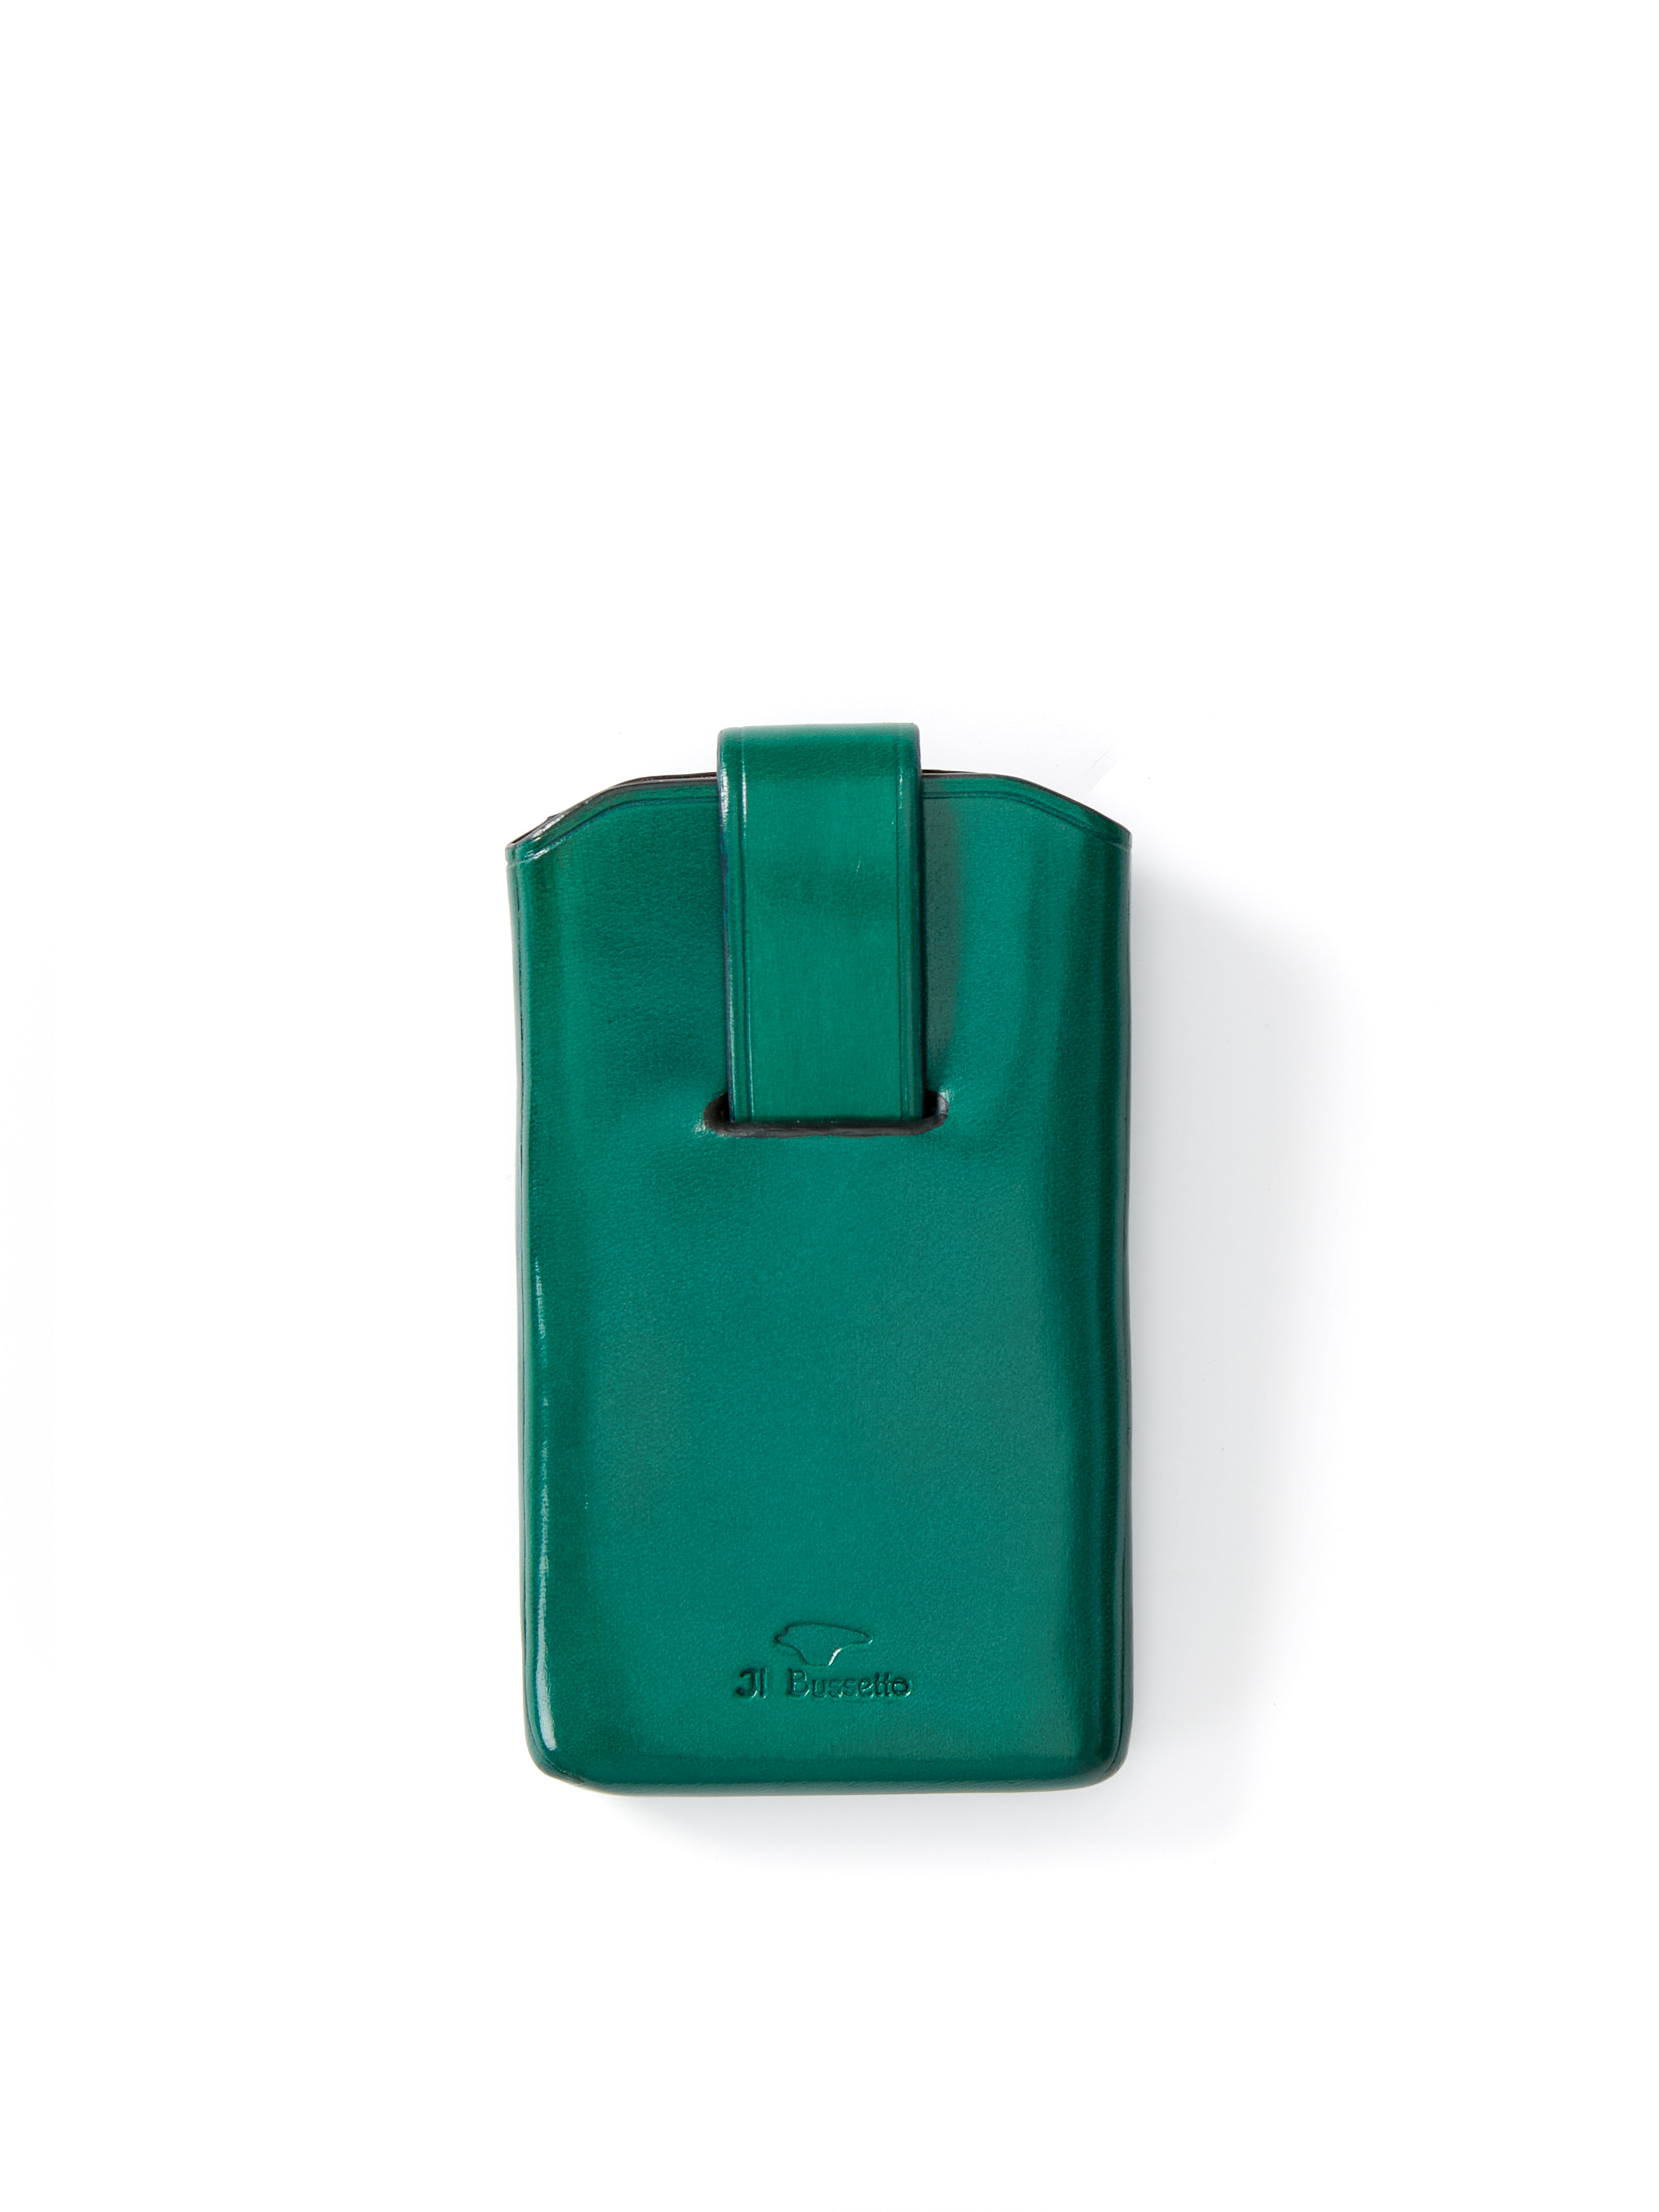 Il Bussetto Business Card Holder Green Leather